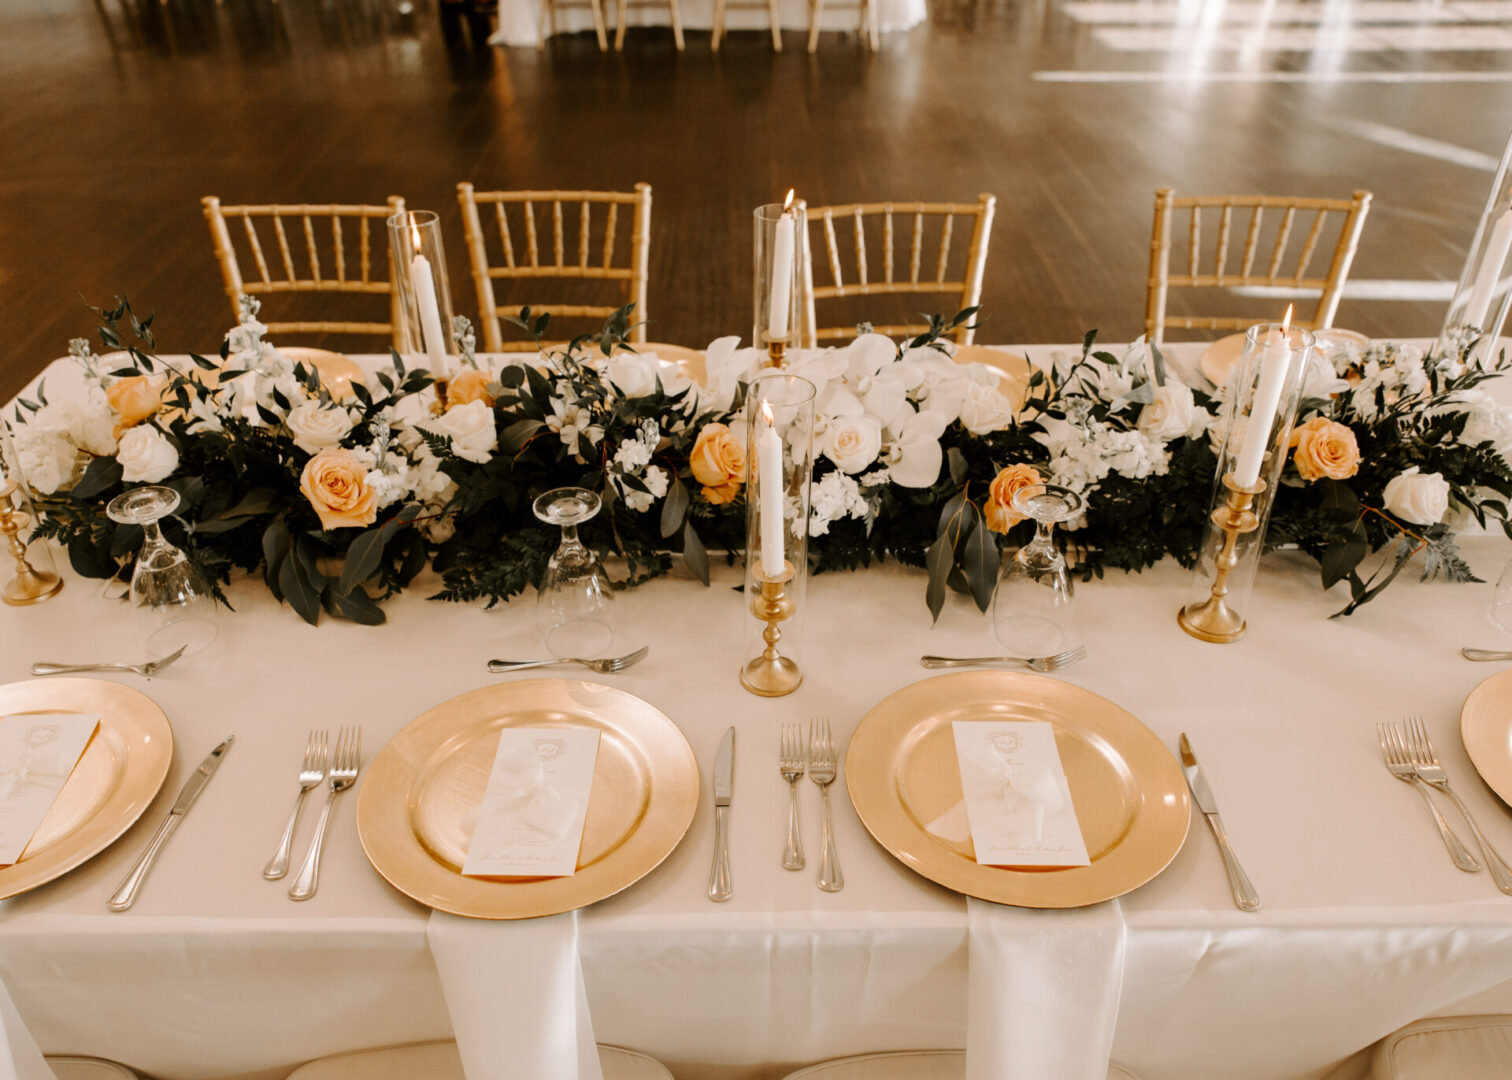 A Table Arrangement for a Weeding